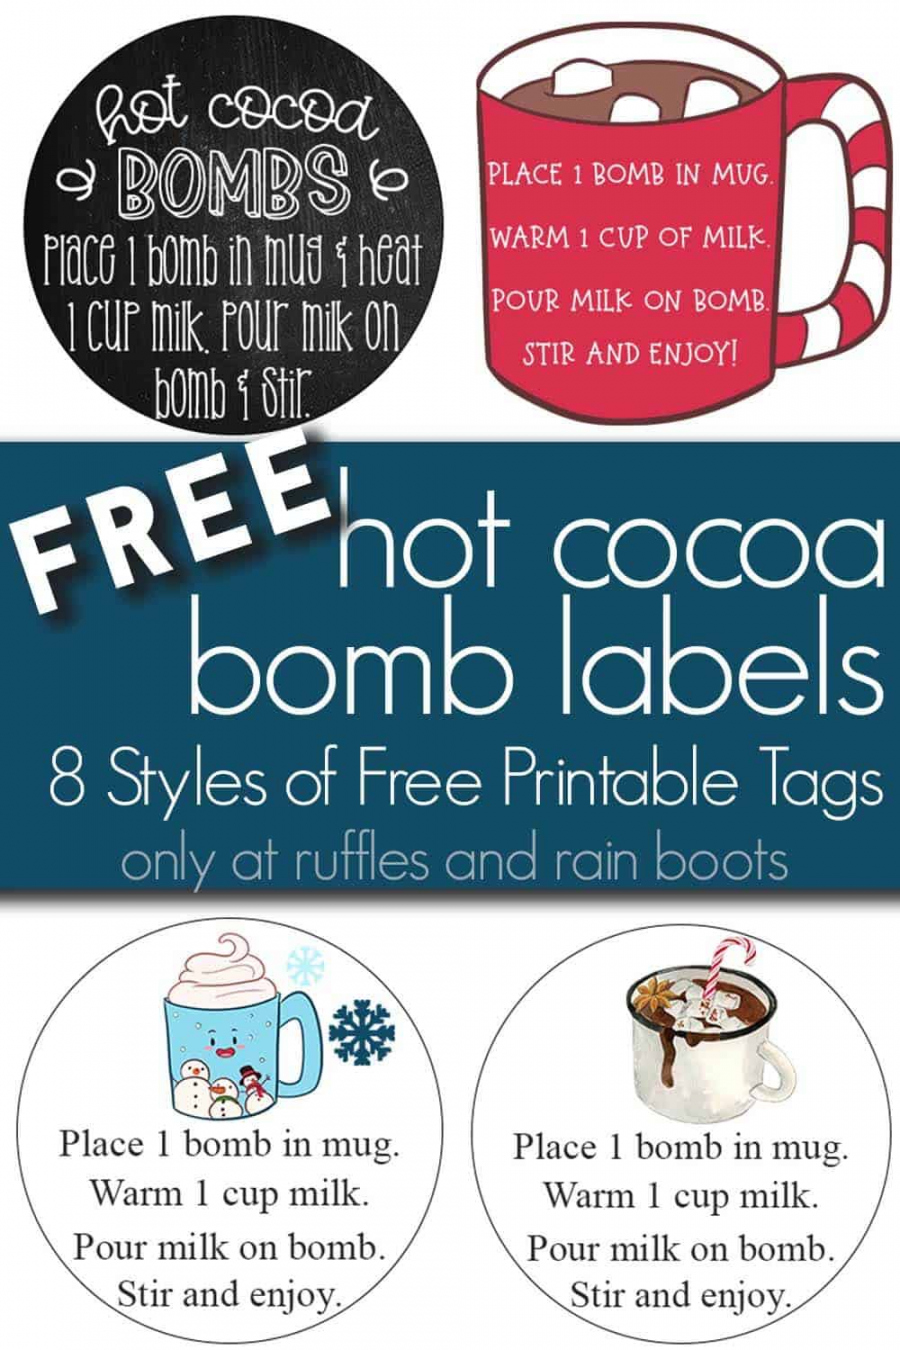 Use These [Free Printable] Hot Cocoa Bomb Labels for Gift Giving! - FREE Printables - Free Printable Hot Chocolate Gift Tags